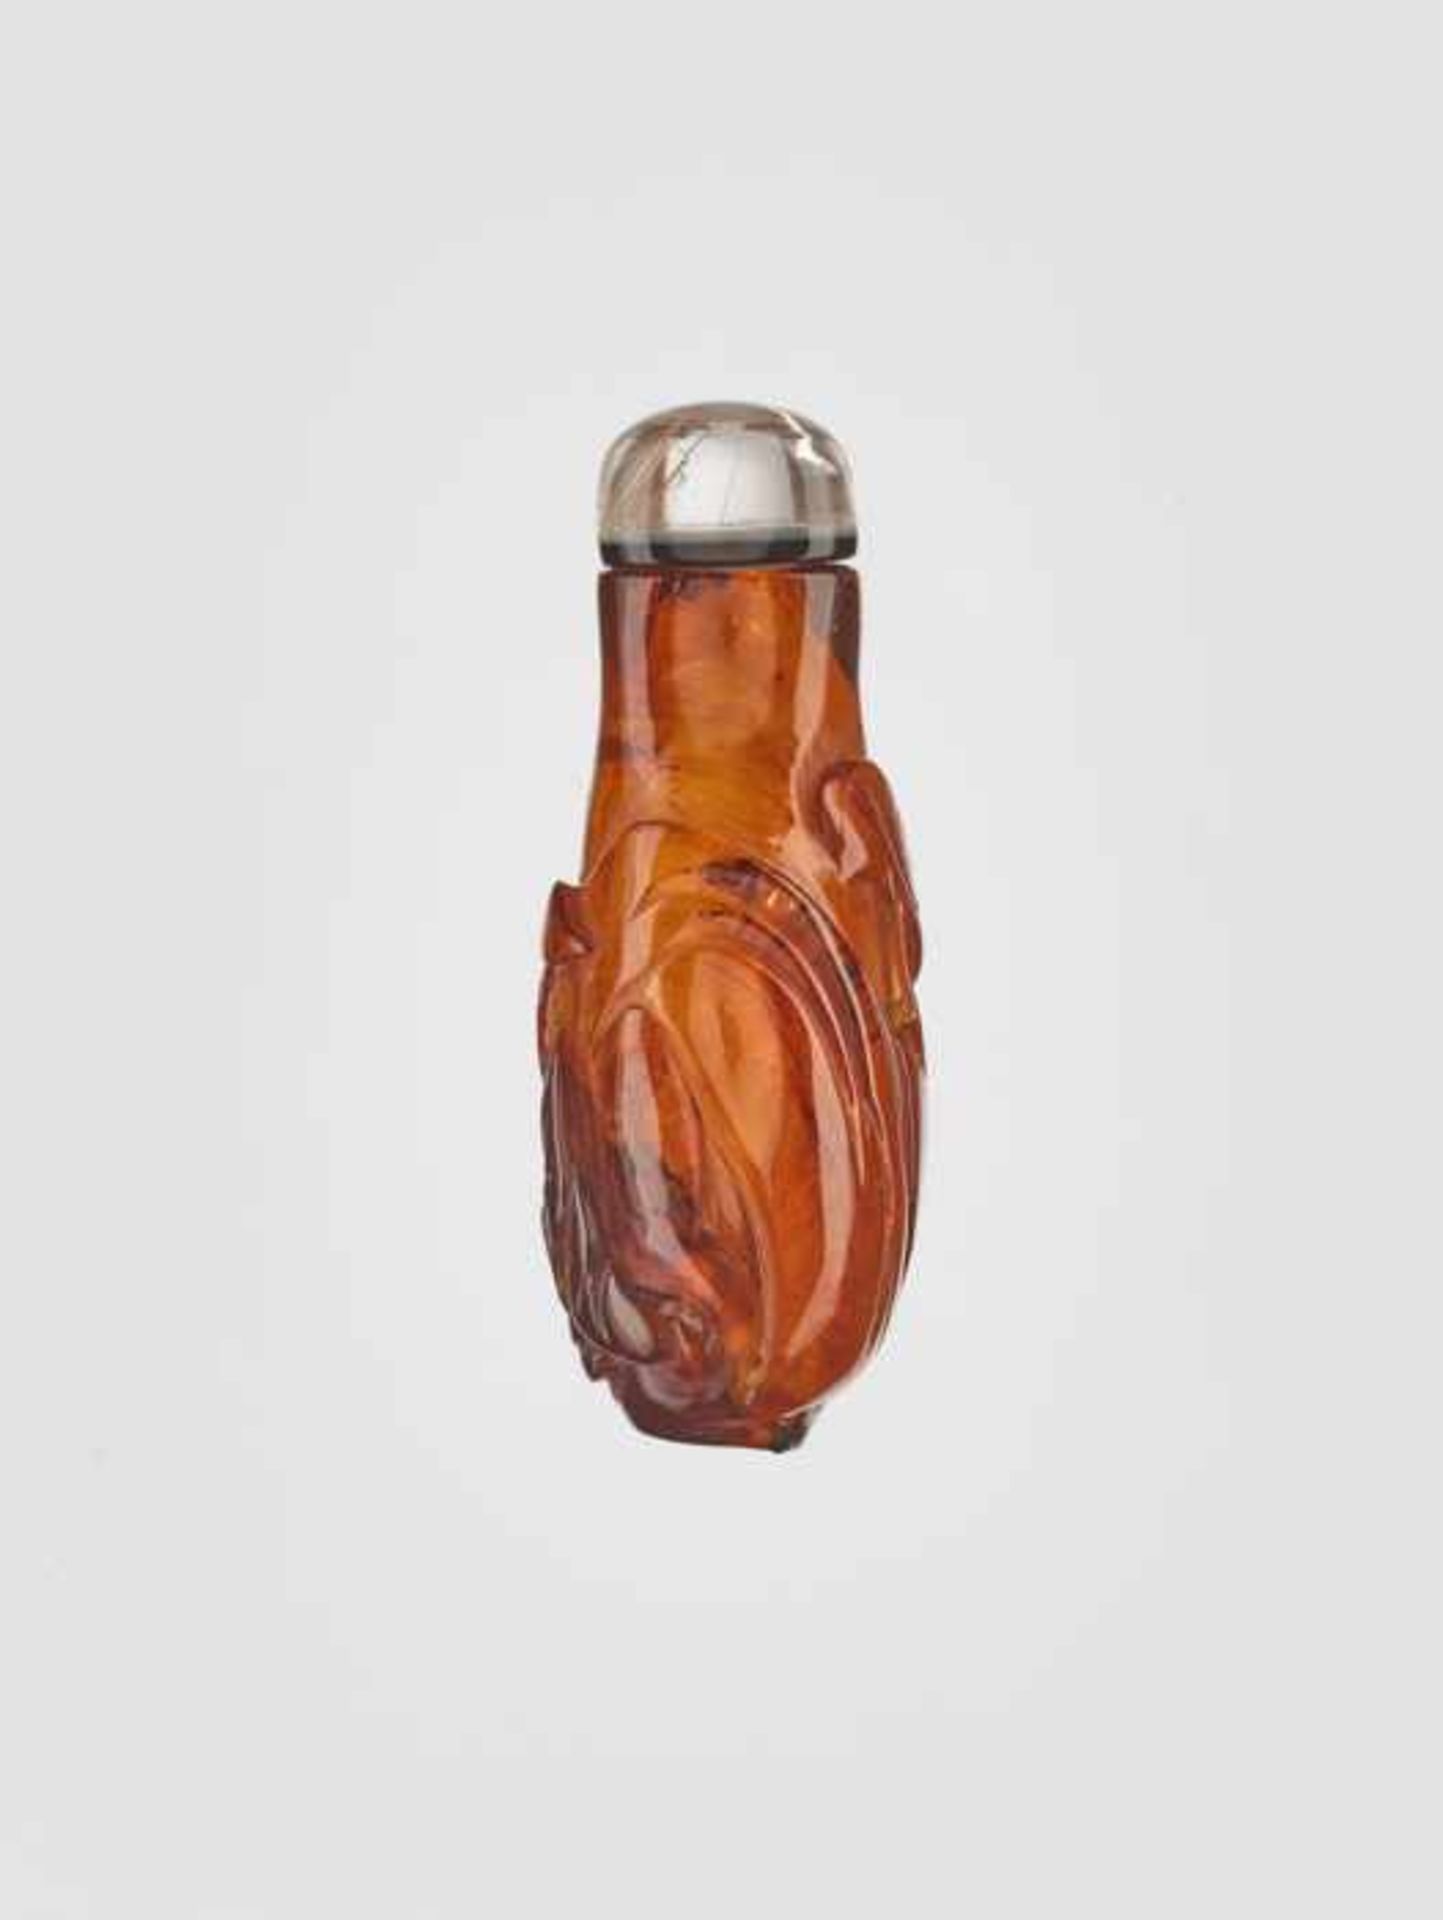 A MINIATURE AMBER ‘FISHERMAN’ SNUFF BOTTLE, EARLY 19th CENTURY Transparent amber of untreated - Image 3 of 6